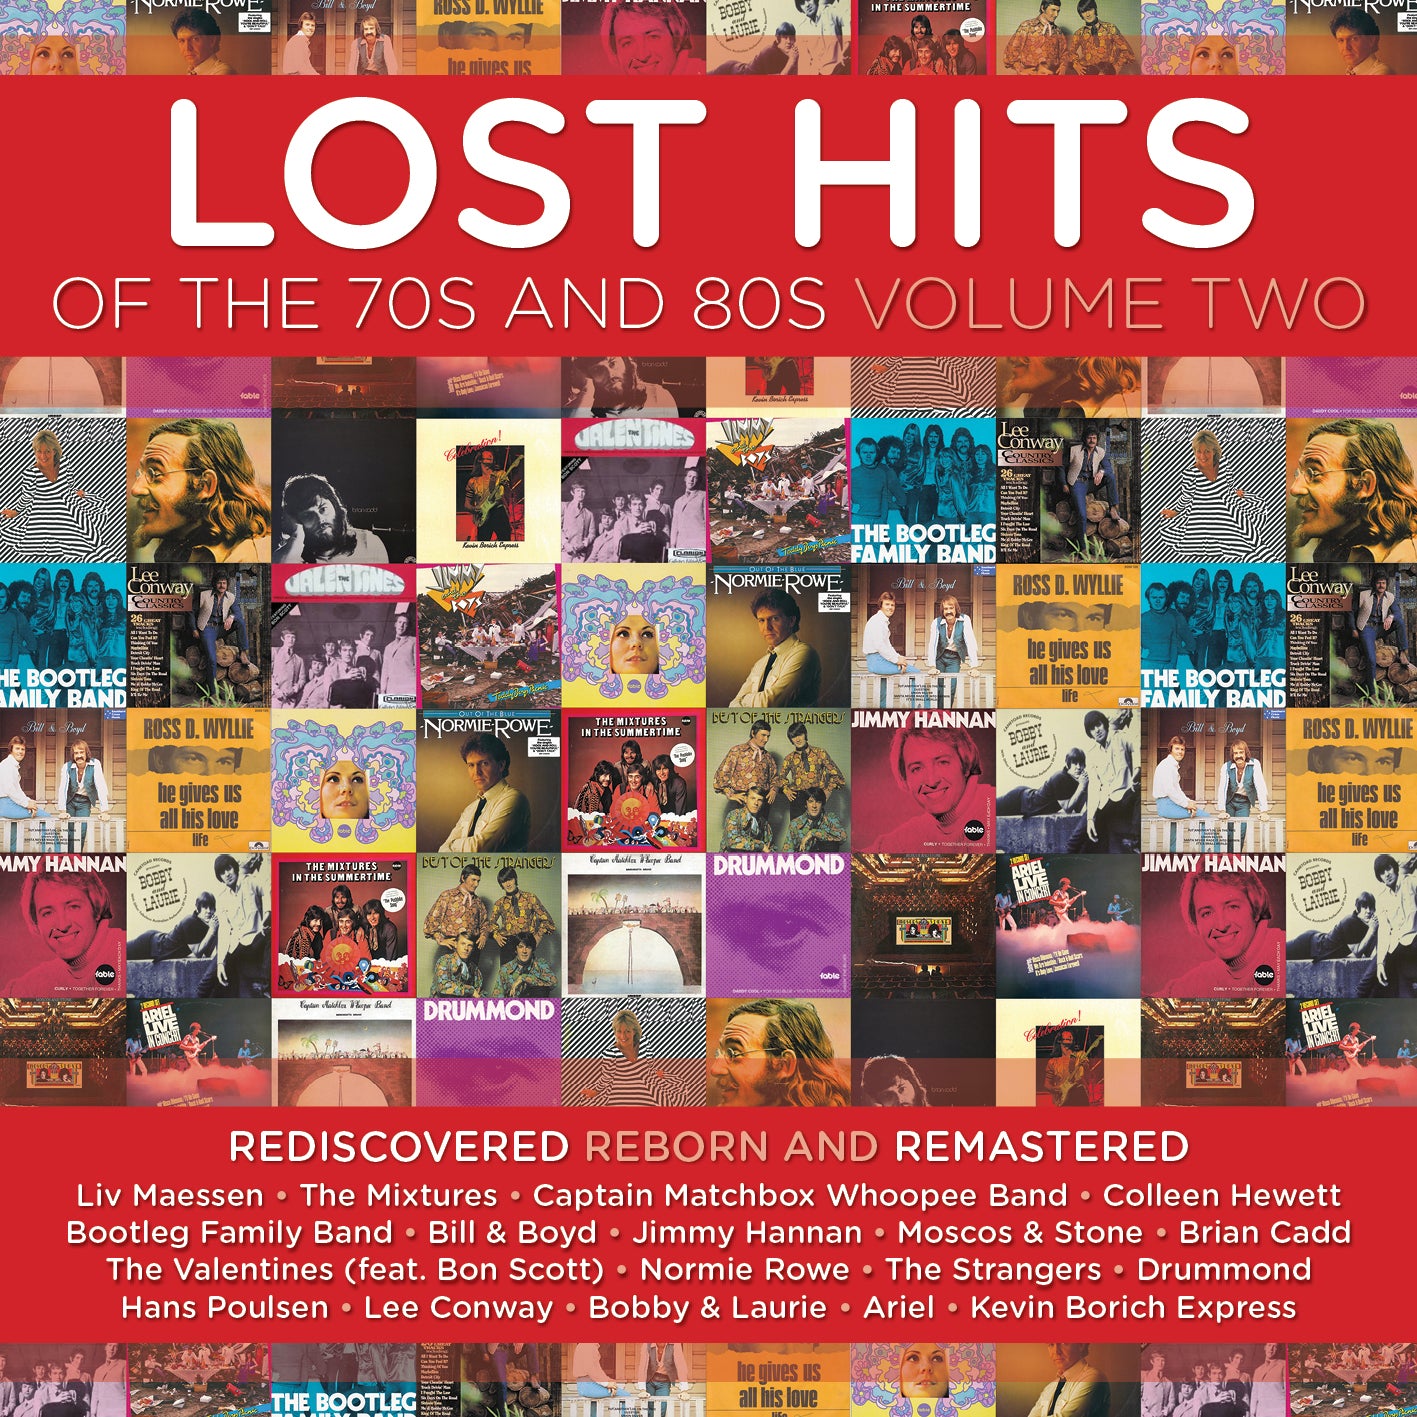 VARIOUS ARTISTS - LOST HITS OF THE 70S AND 80S (VOLUME TWO)